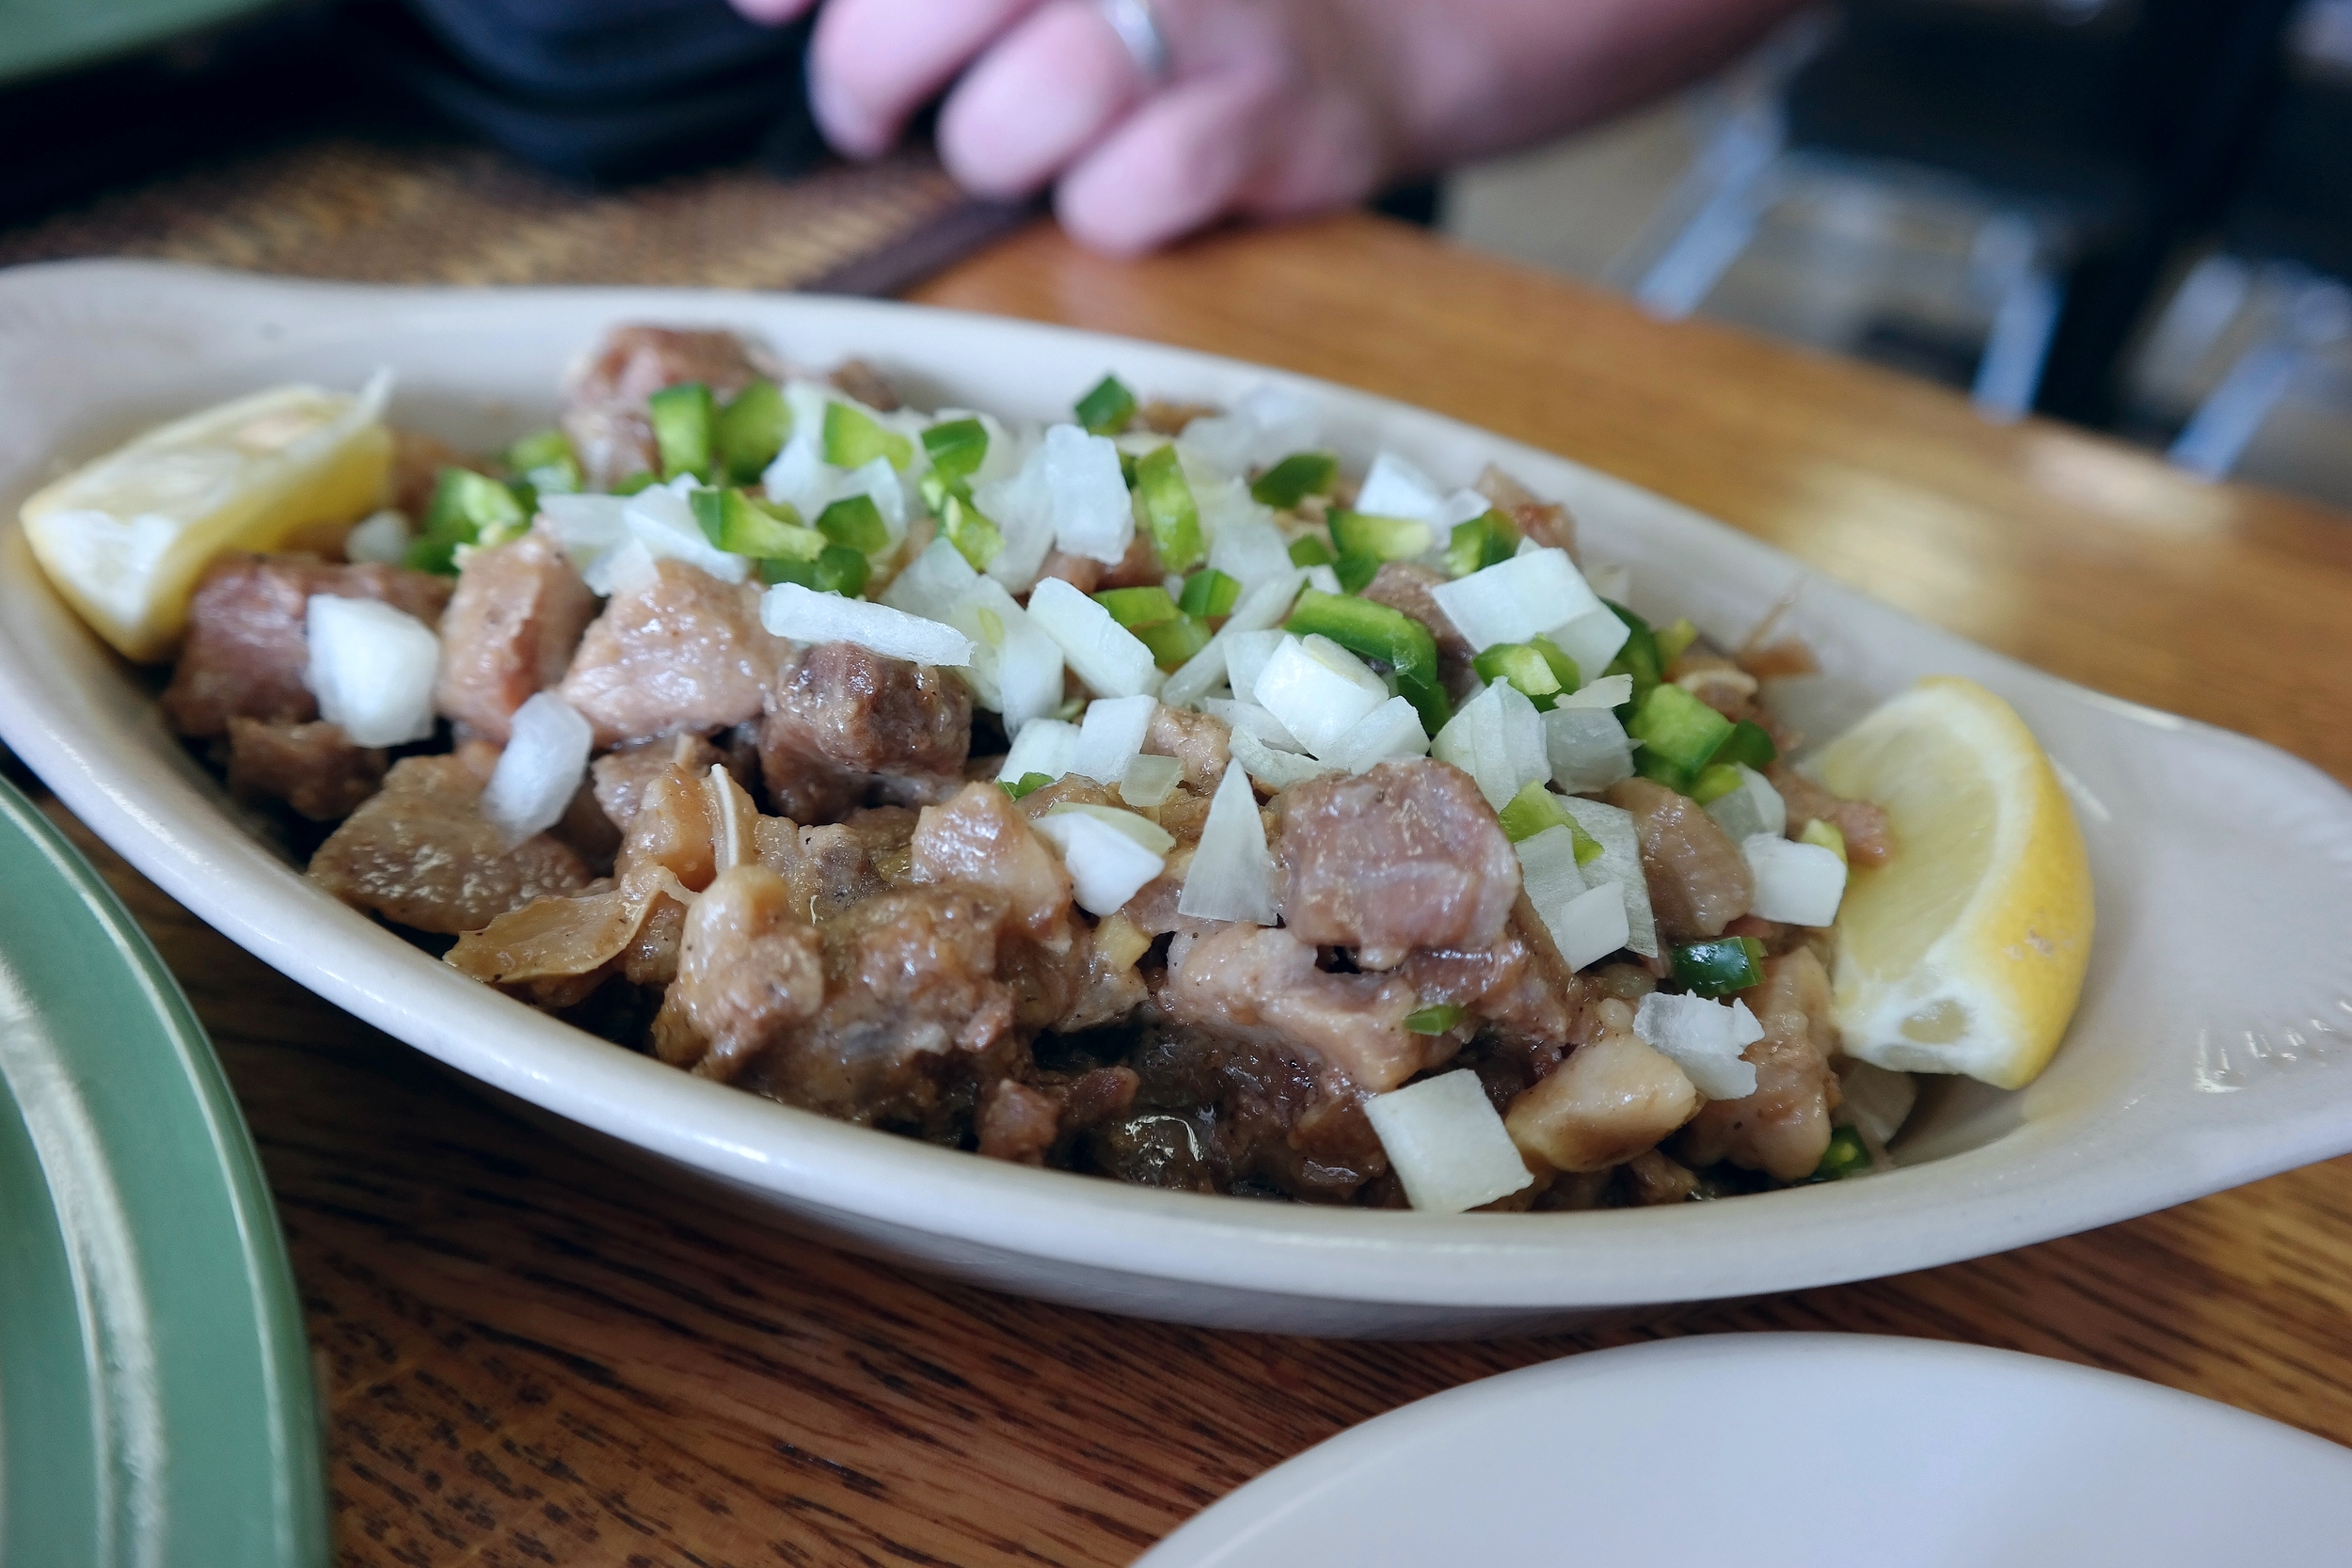 Sisig - chopped pork including pig ears and jowl sauteed with garlic and onions, garnished with jalapenos